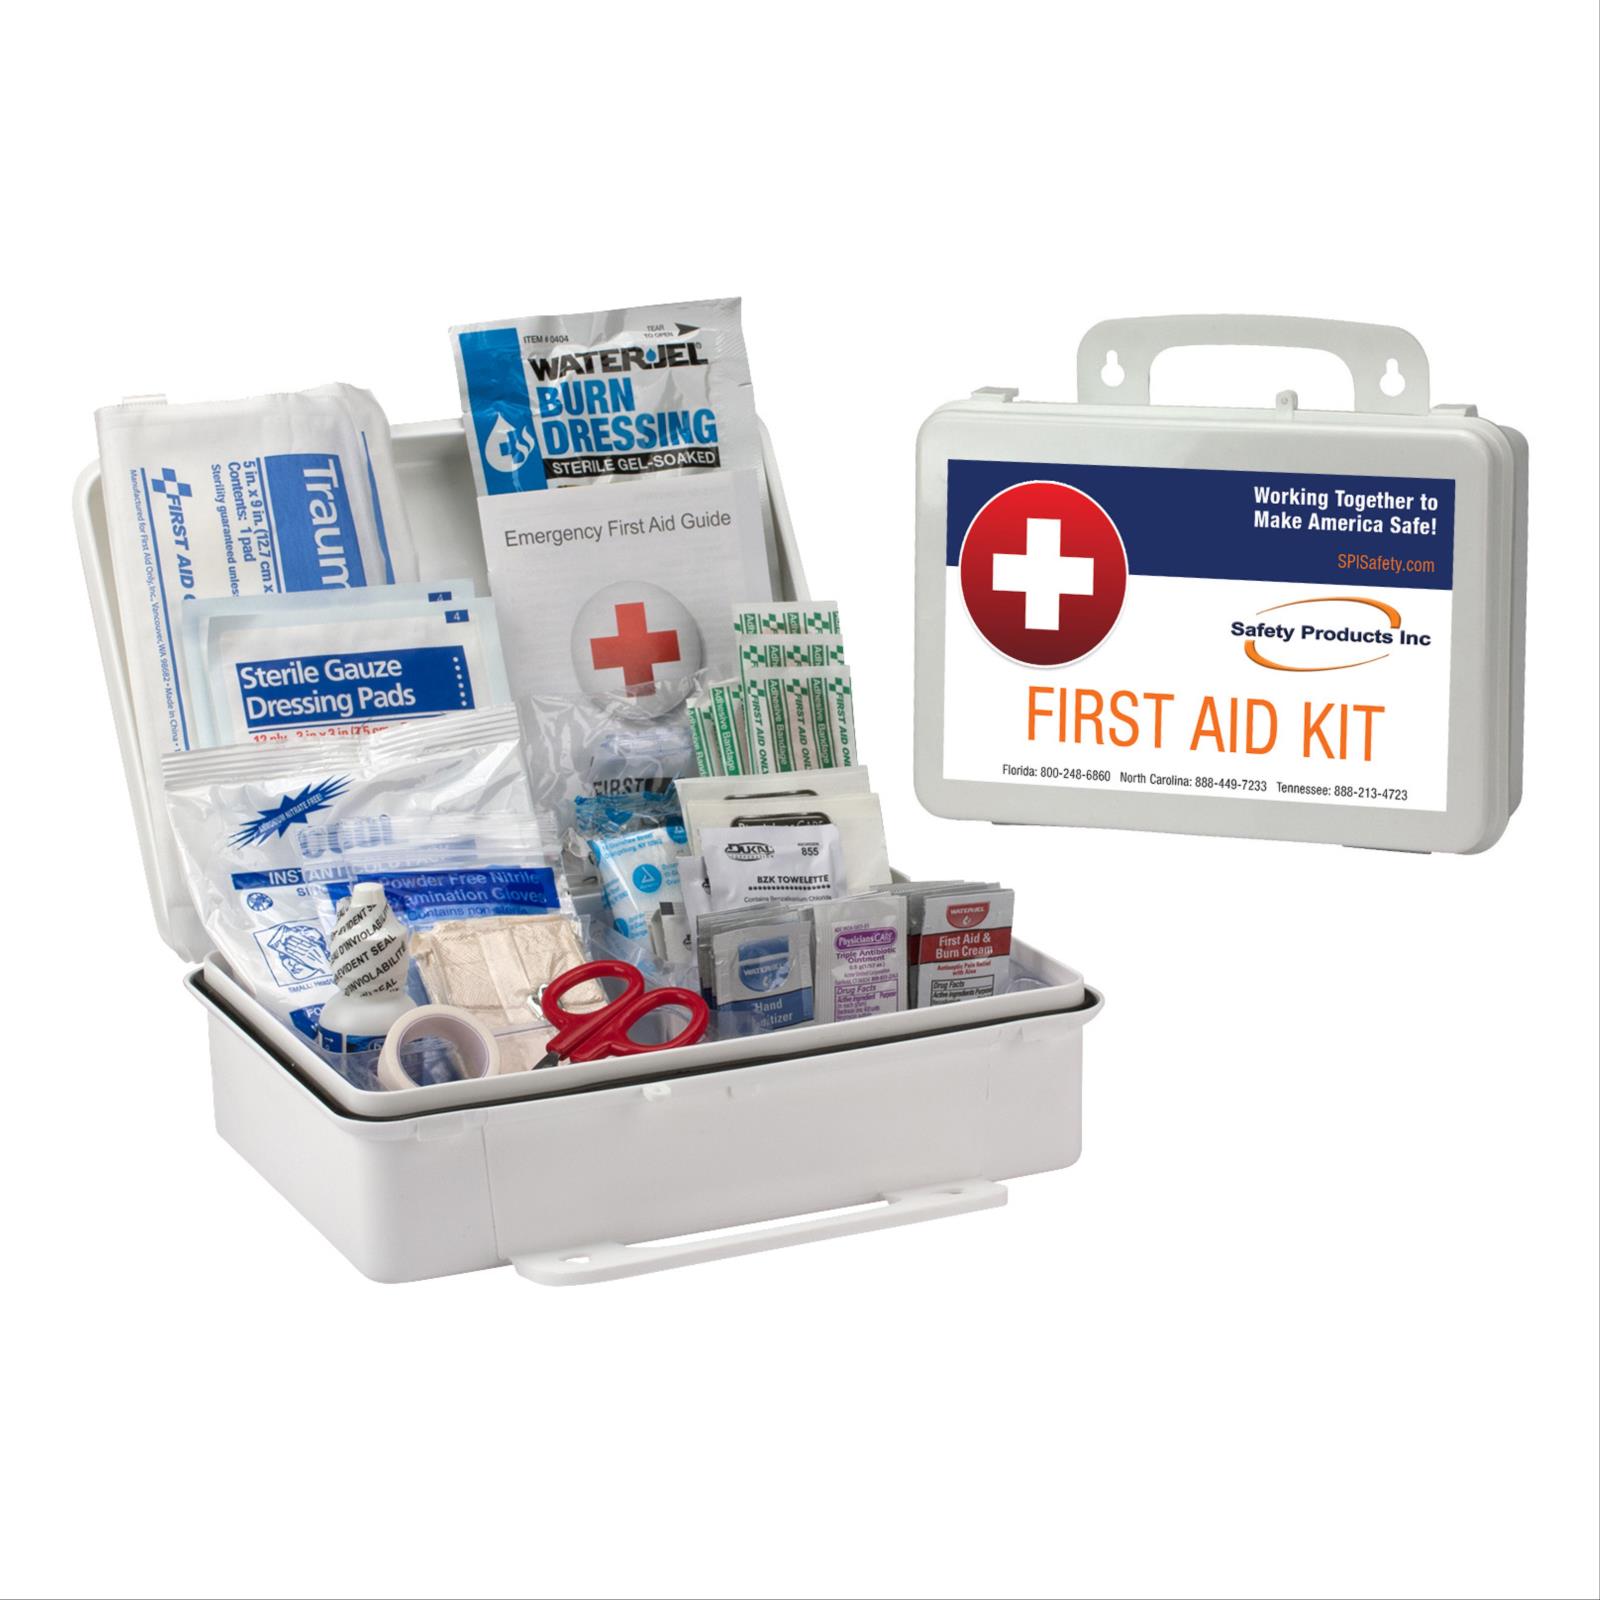 ANSI A Compliant, 25 Person First Aid Kit